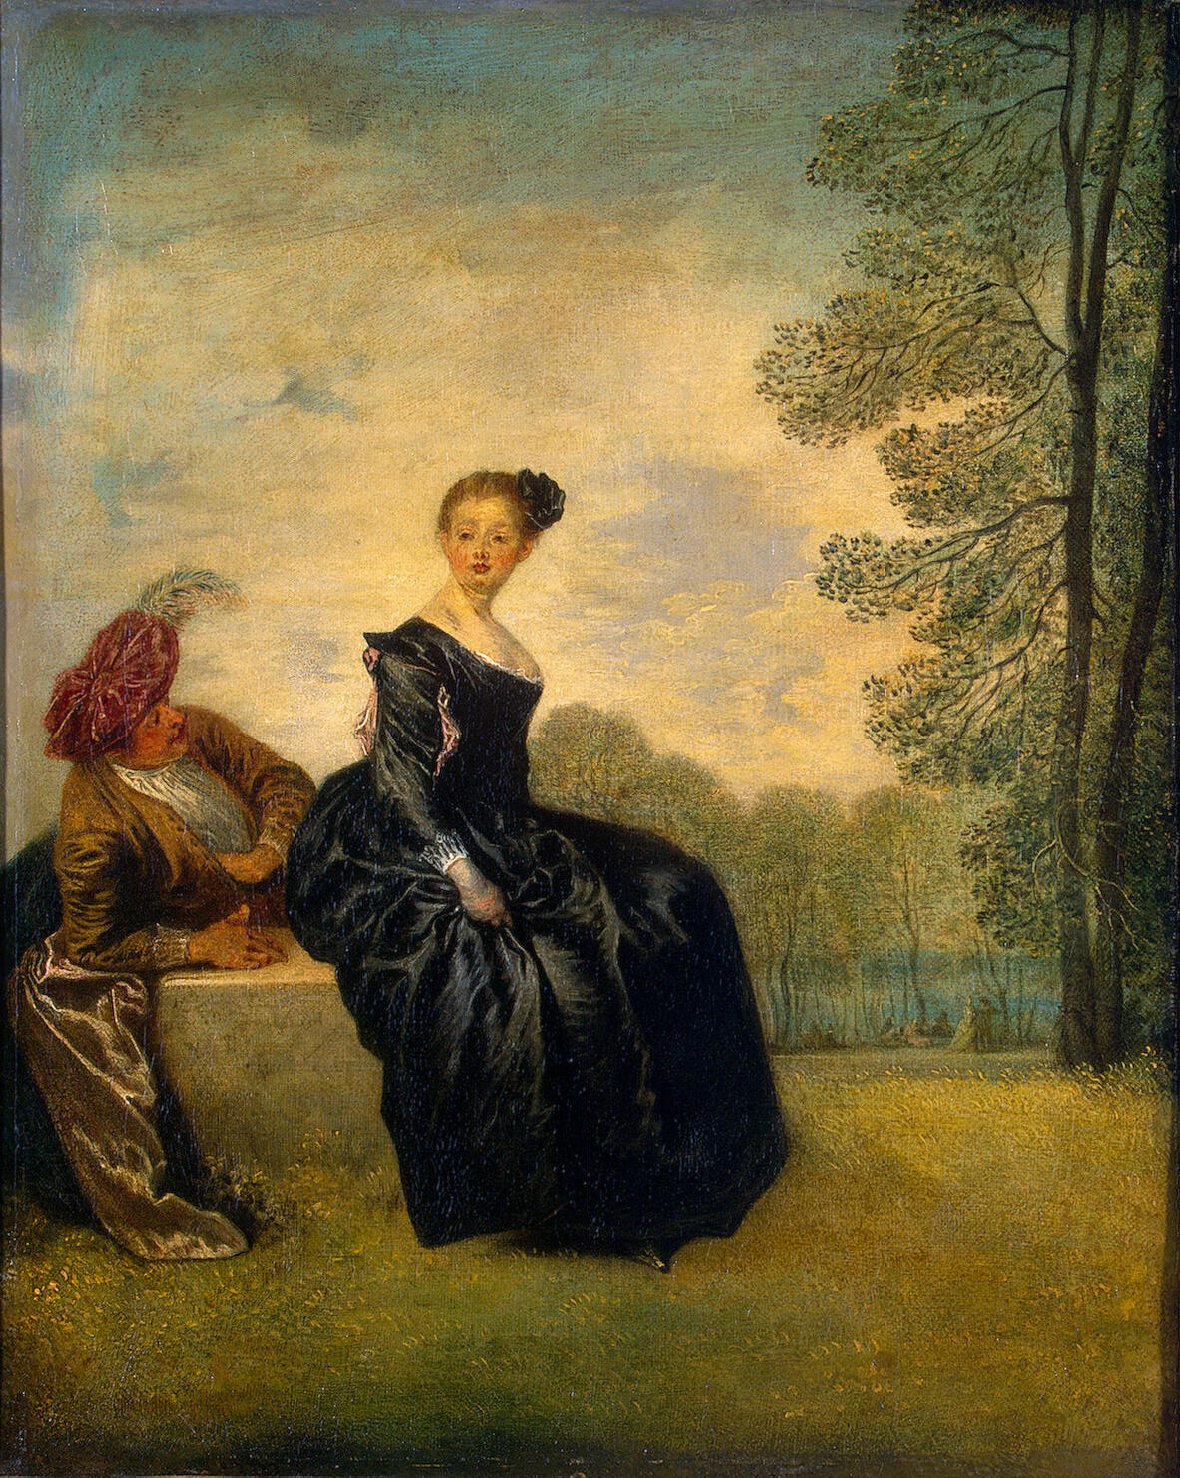 The Capricious Girl by Antoine Watteau - c. 1718 - 42 x 134 cm Hermitage Museum